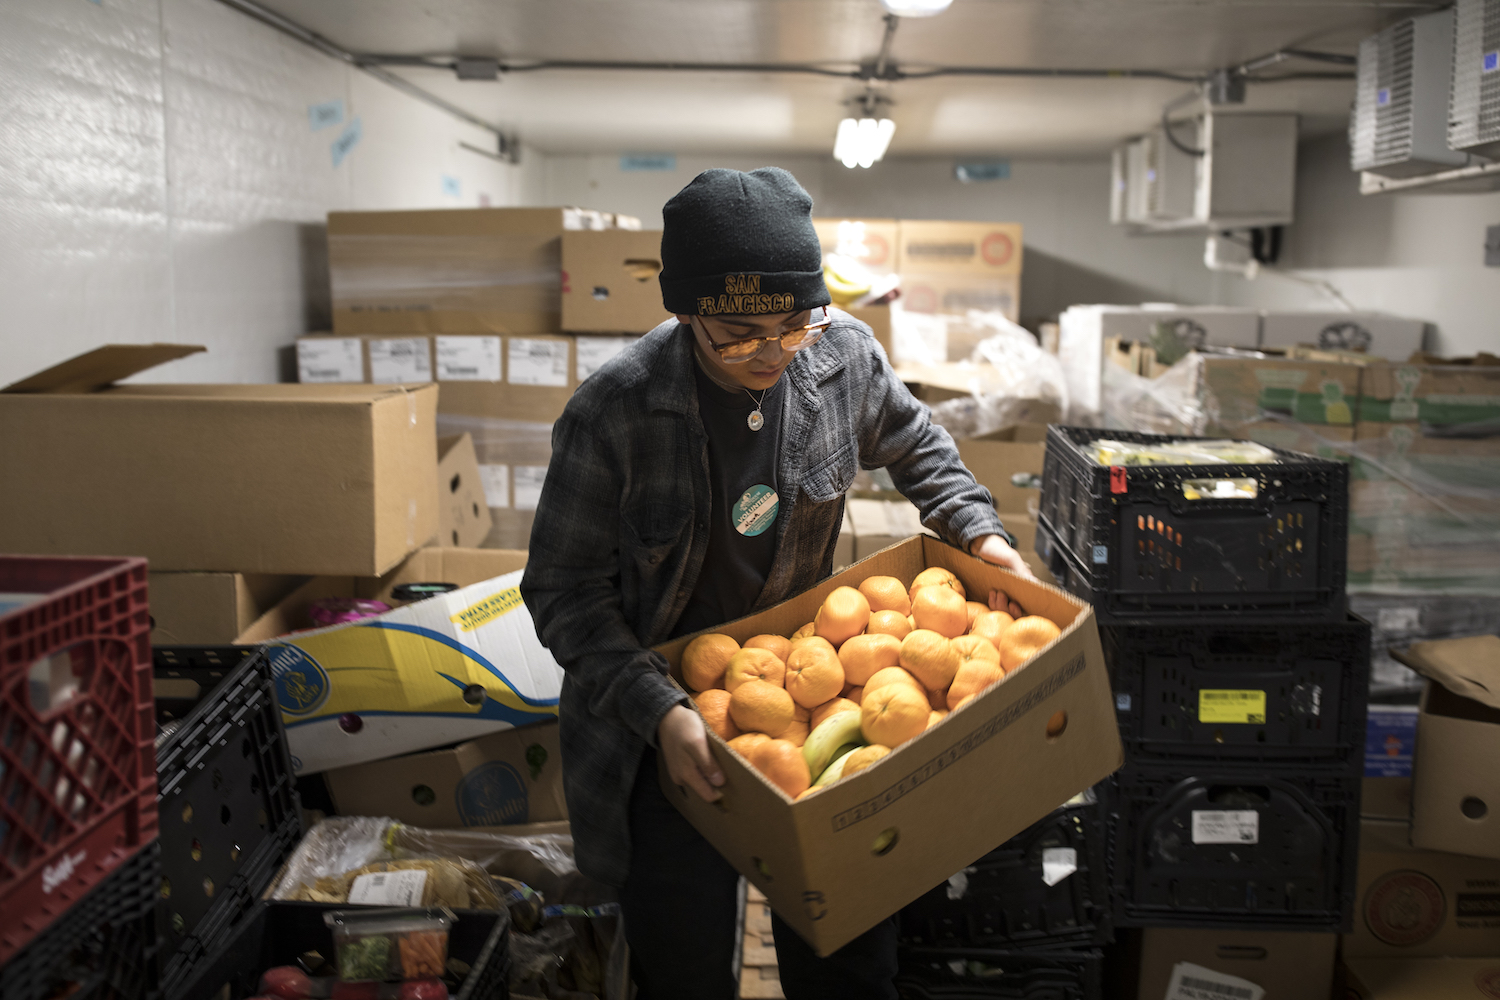 Person wearing hat lifting box of produce in storage room